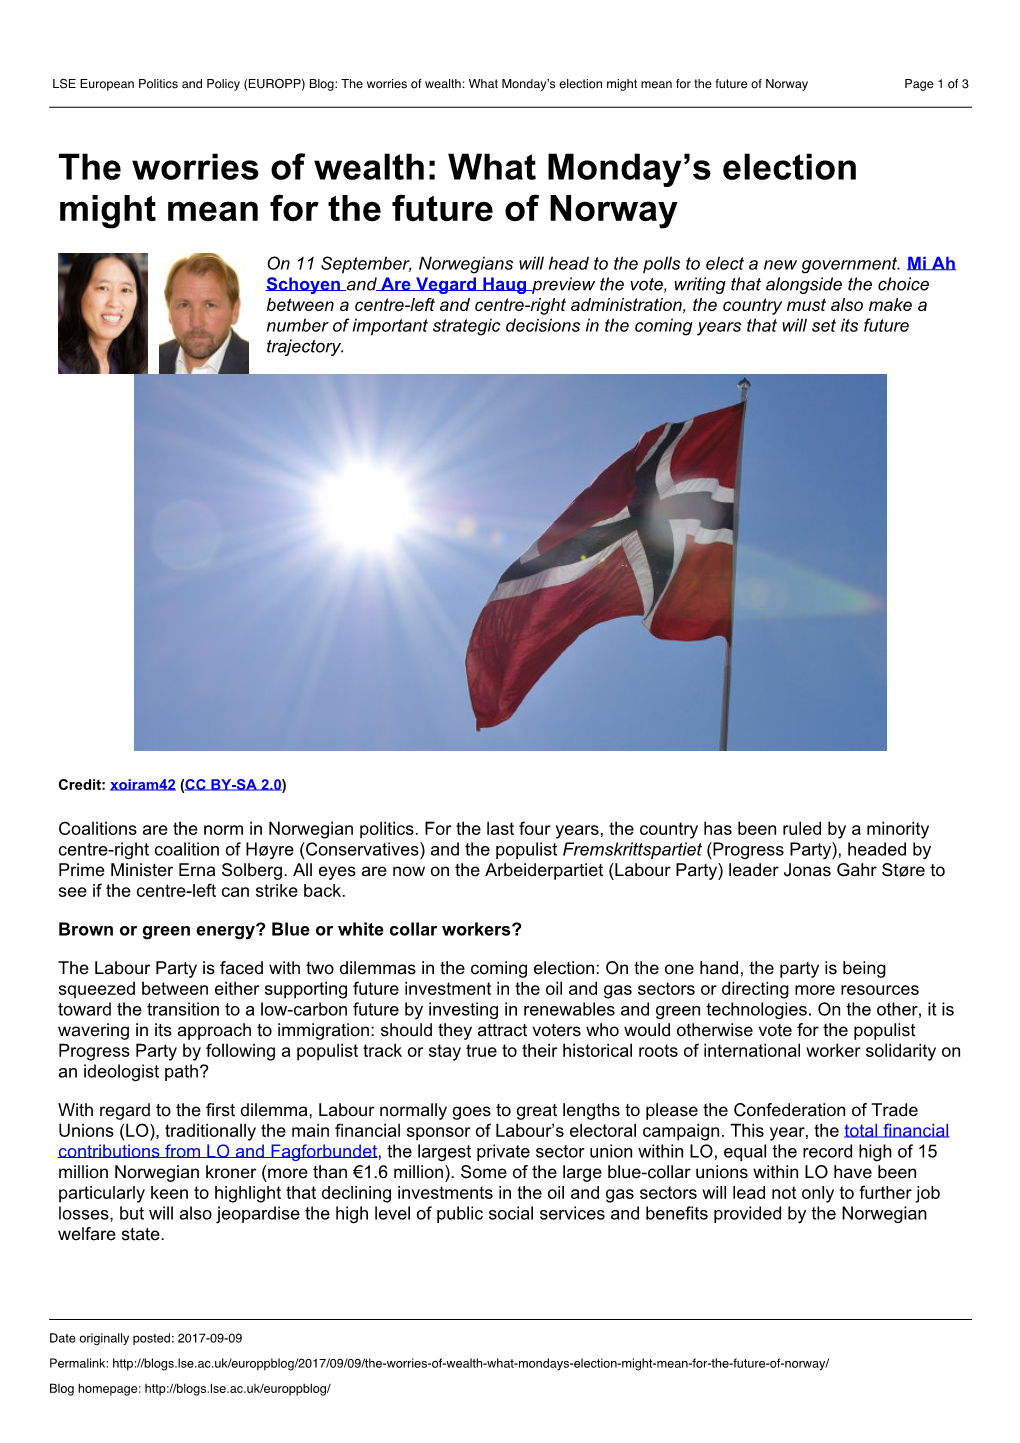 (EUROPP) Blog: the Worries of Wealth: What Monday’S Election Might Mean for the Future of Norway Page 1 of 3